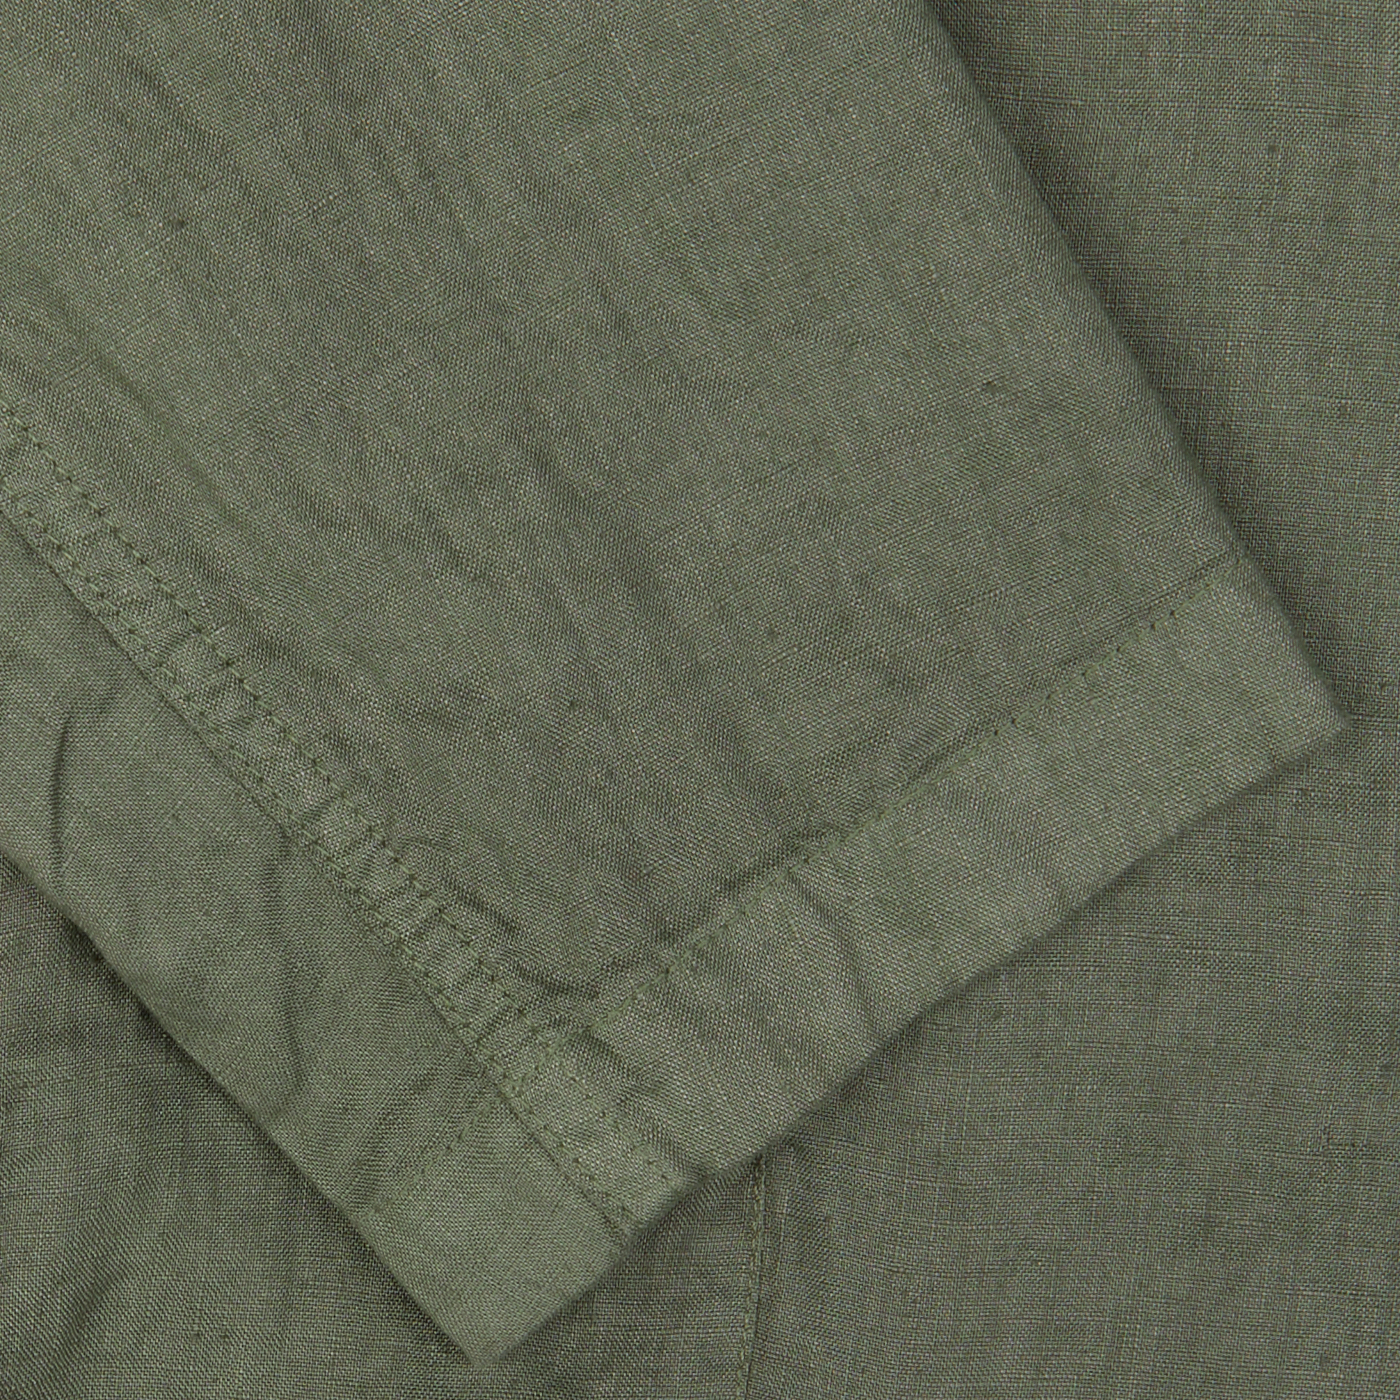 Close-up of green textured fabric with visible stitch detailing on the hem of an Aspesi Moss Green Washed Linen Samuraki Jacket.